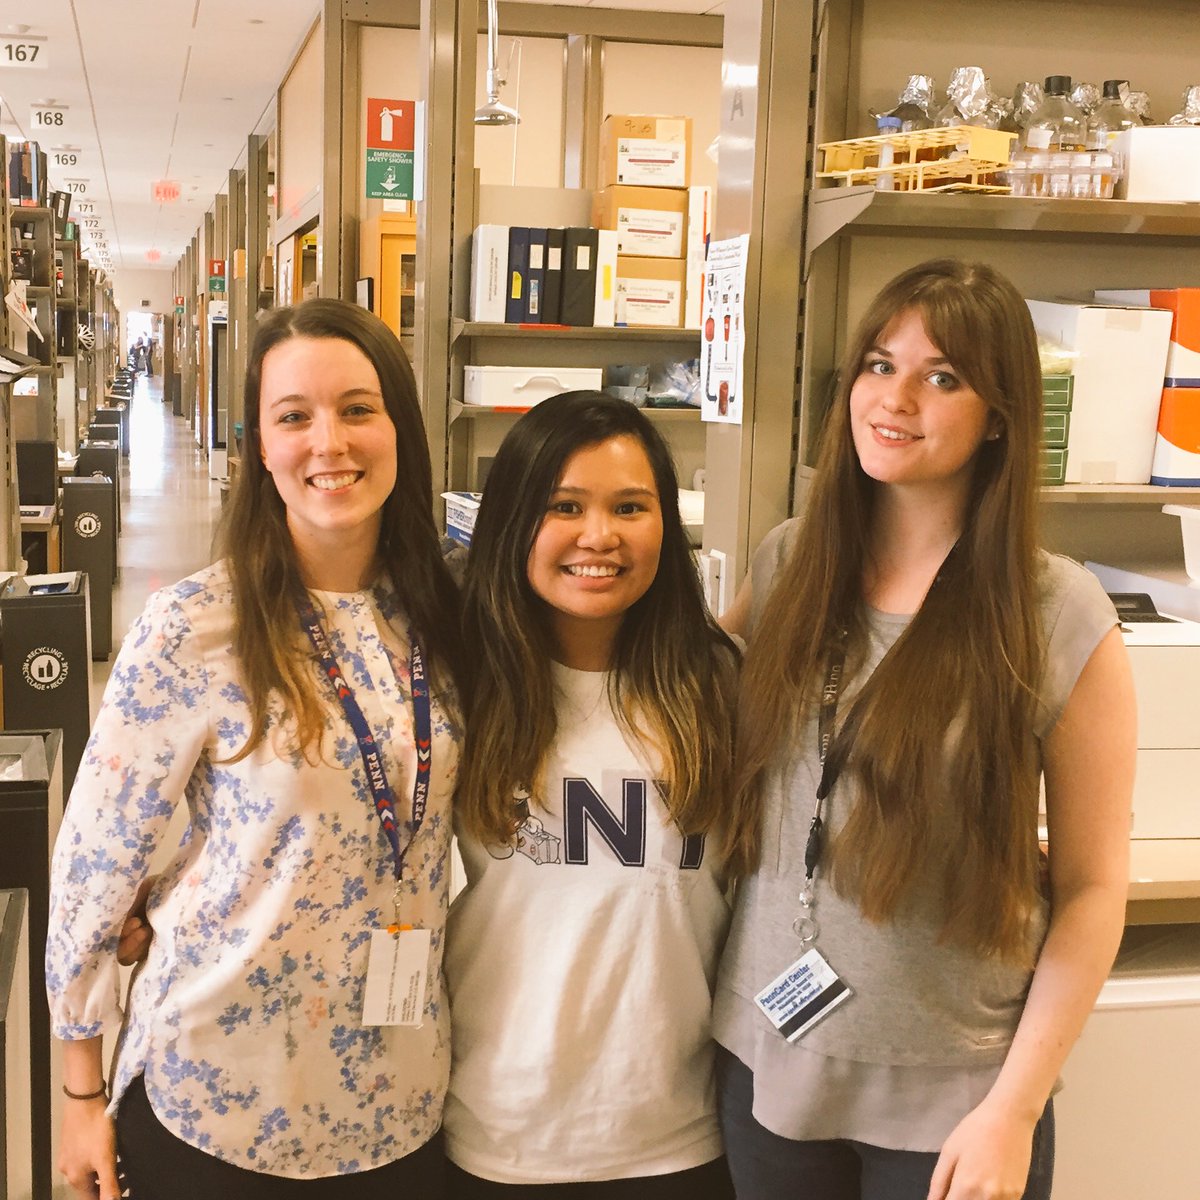 Congratulations to Sierra, Mariel & Desi for successfully passing their candidacy exams! PhD students => PhD candidates!